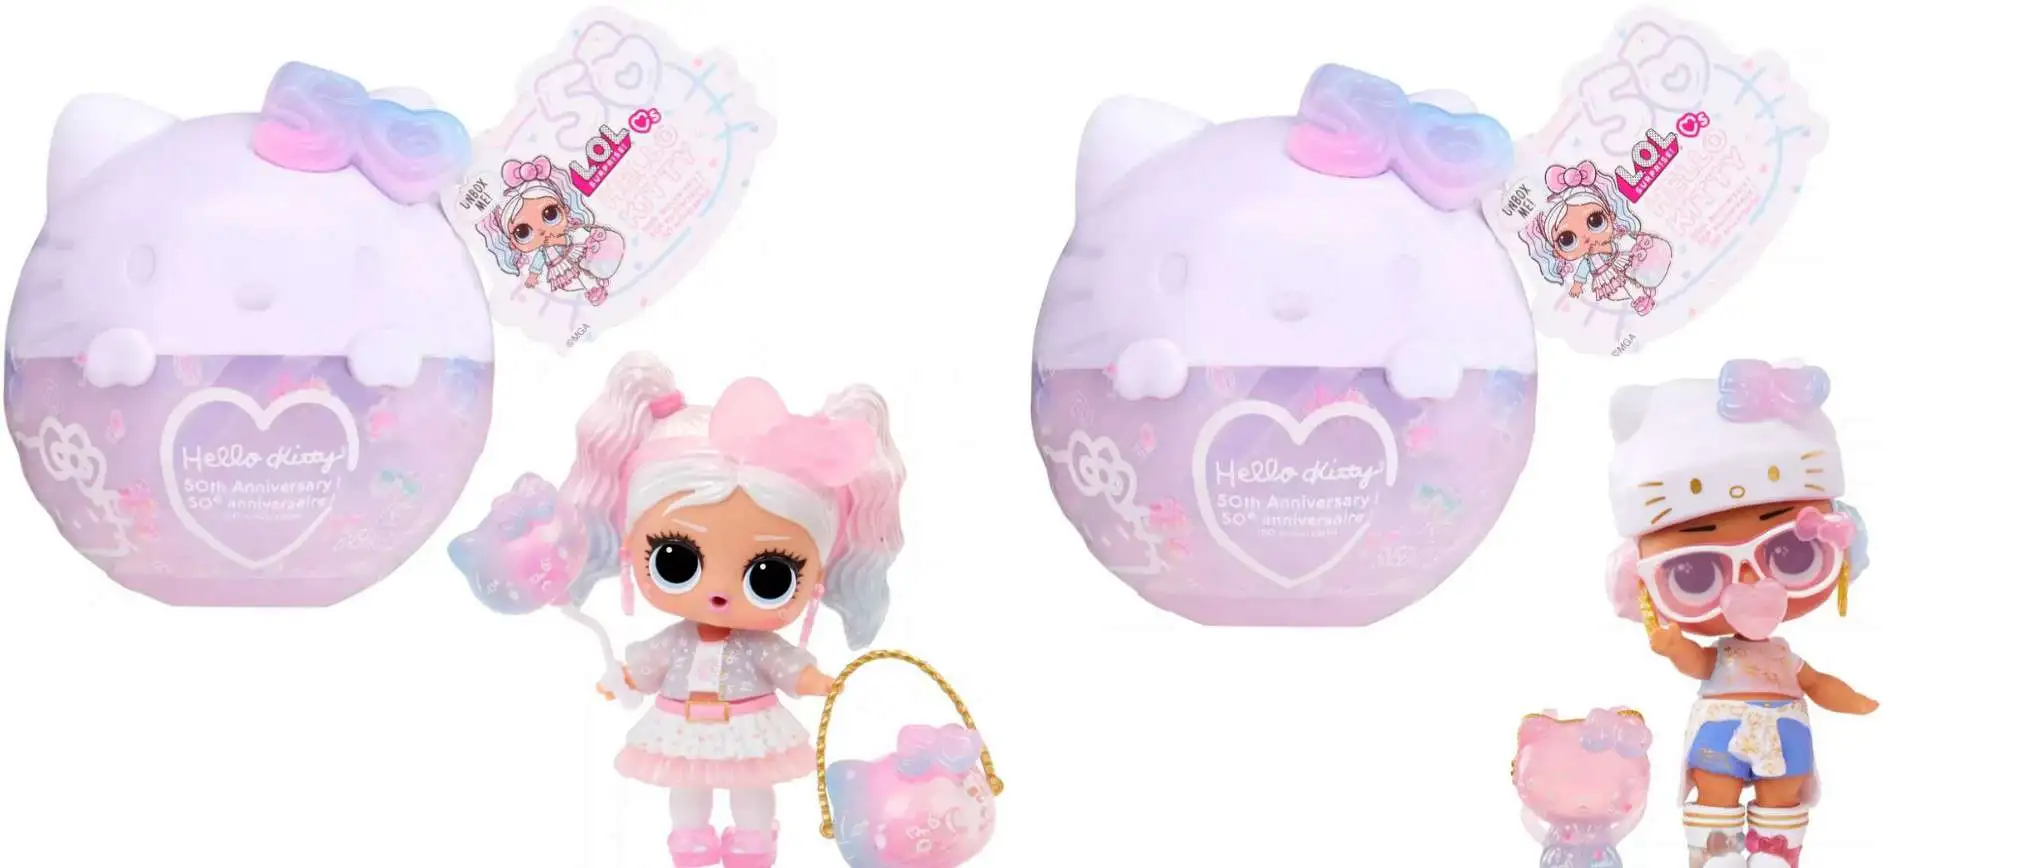 50TH ANNIVERSARY! LOL SURPRISE HELLO KITTY LIMITED EDITION DOLLS